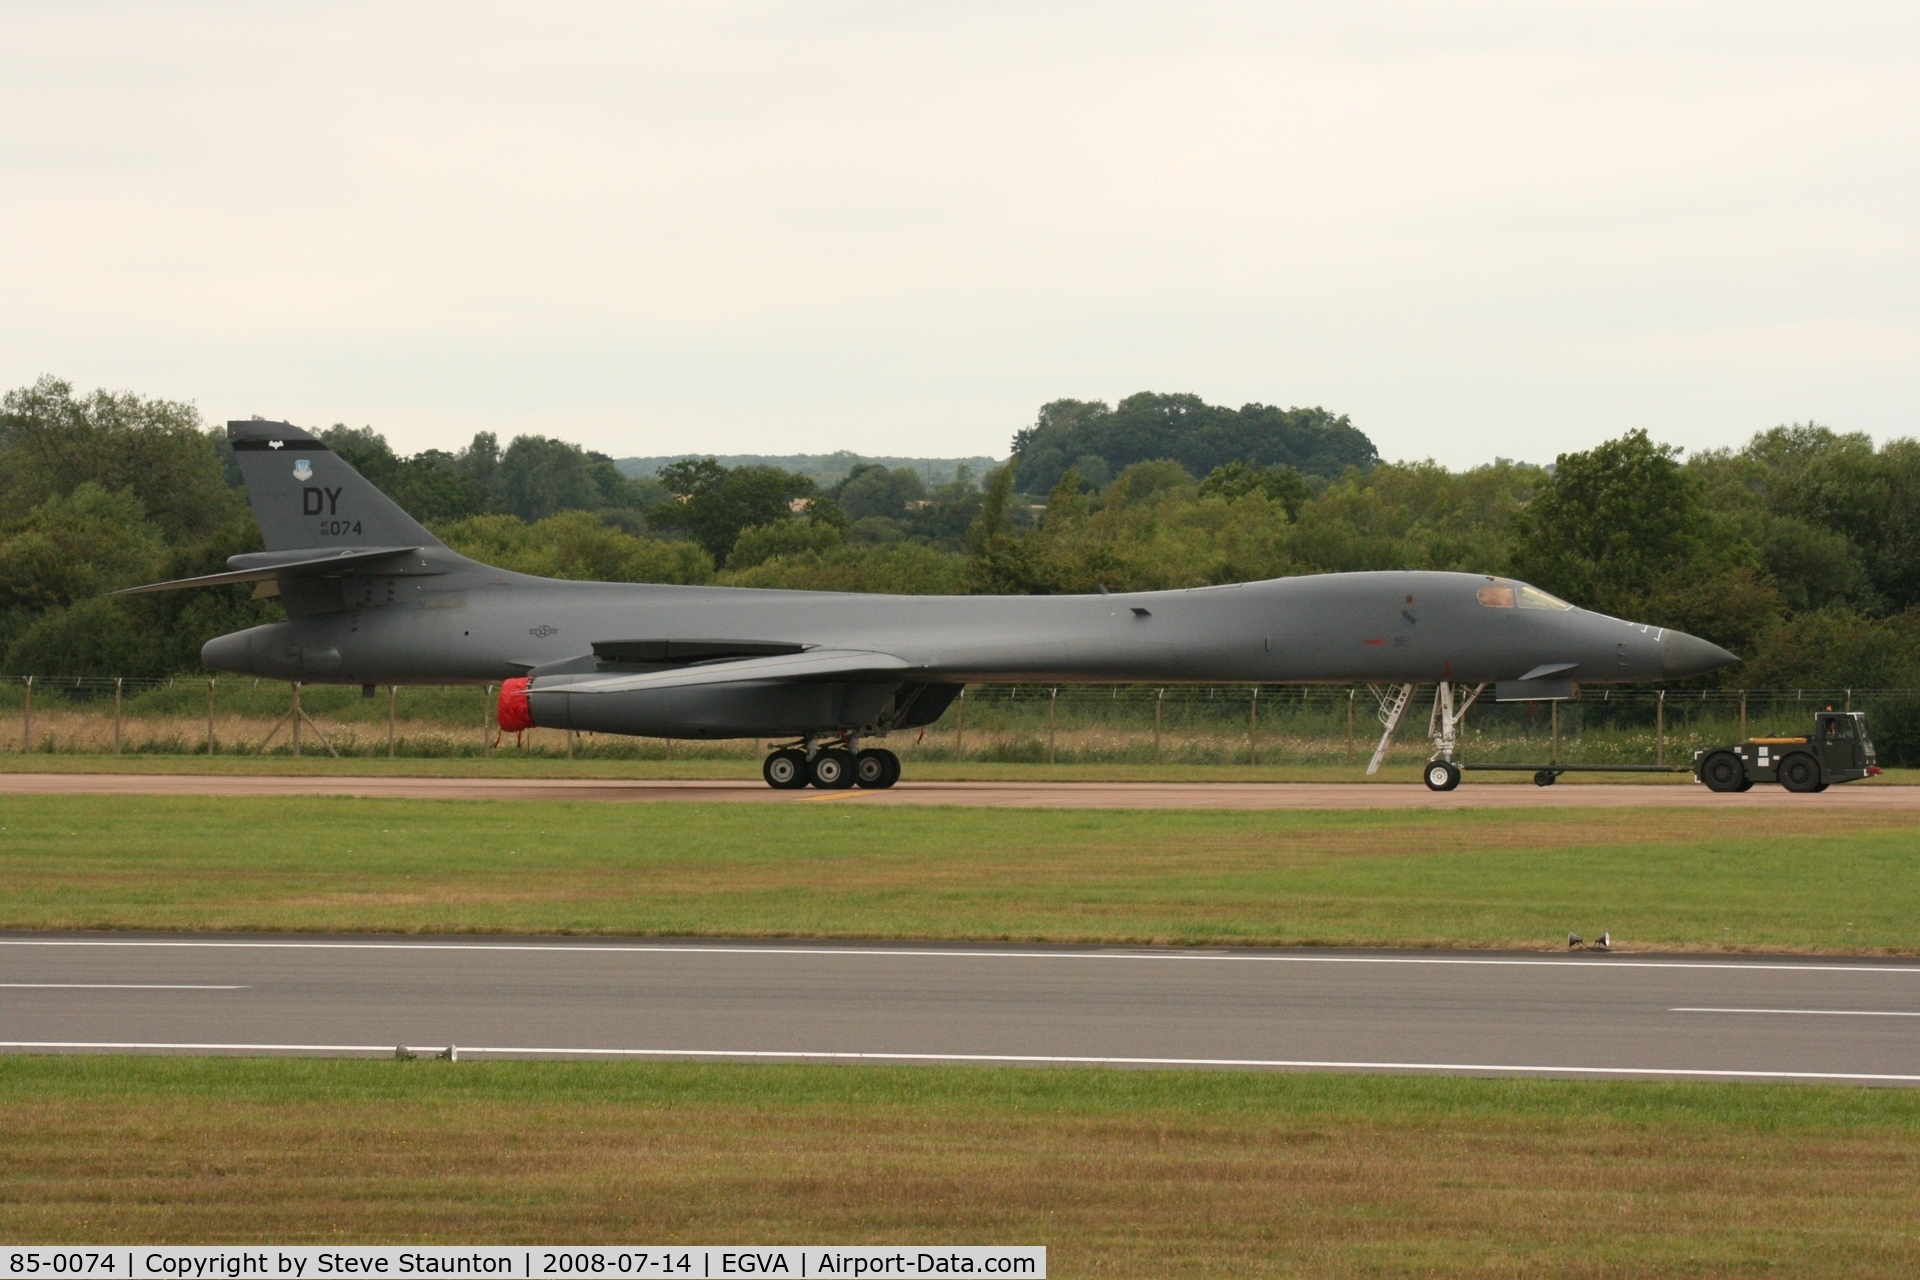 85-0074, Rockwell B-1B Lancer C/N 34, Taken at the Royal International Air Tattoo 2008 during arrivals and departures (show days cancelled due to bad weather)